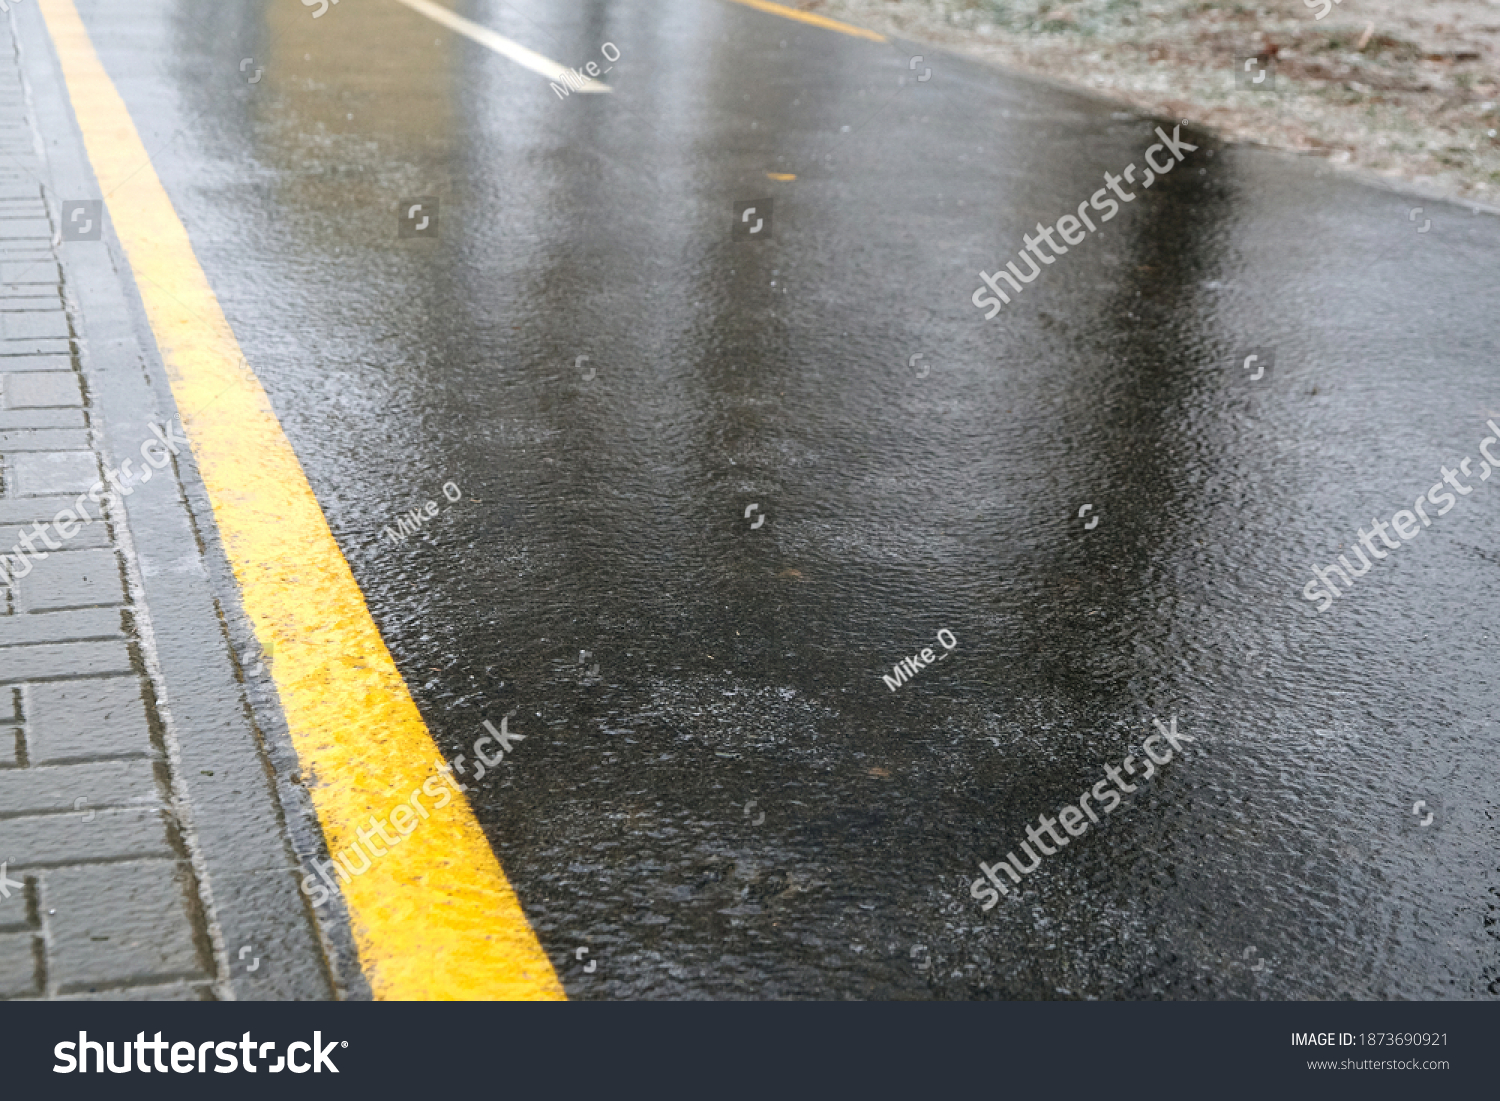 Ice crusted ground, icy road, slippery street, winter weather #1873690921